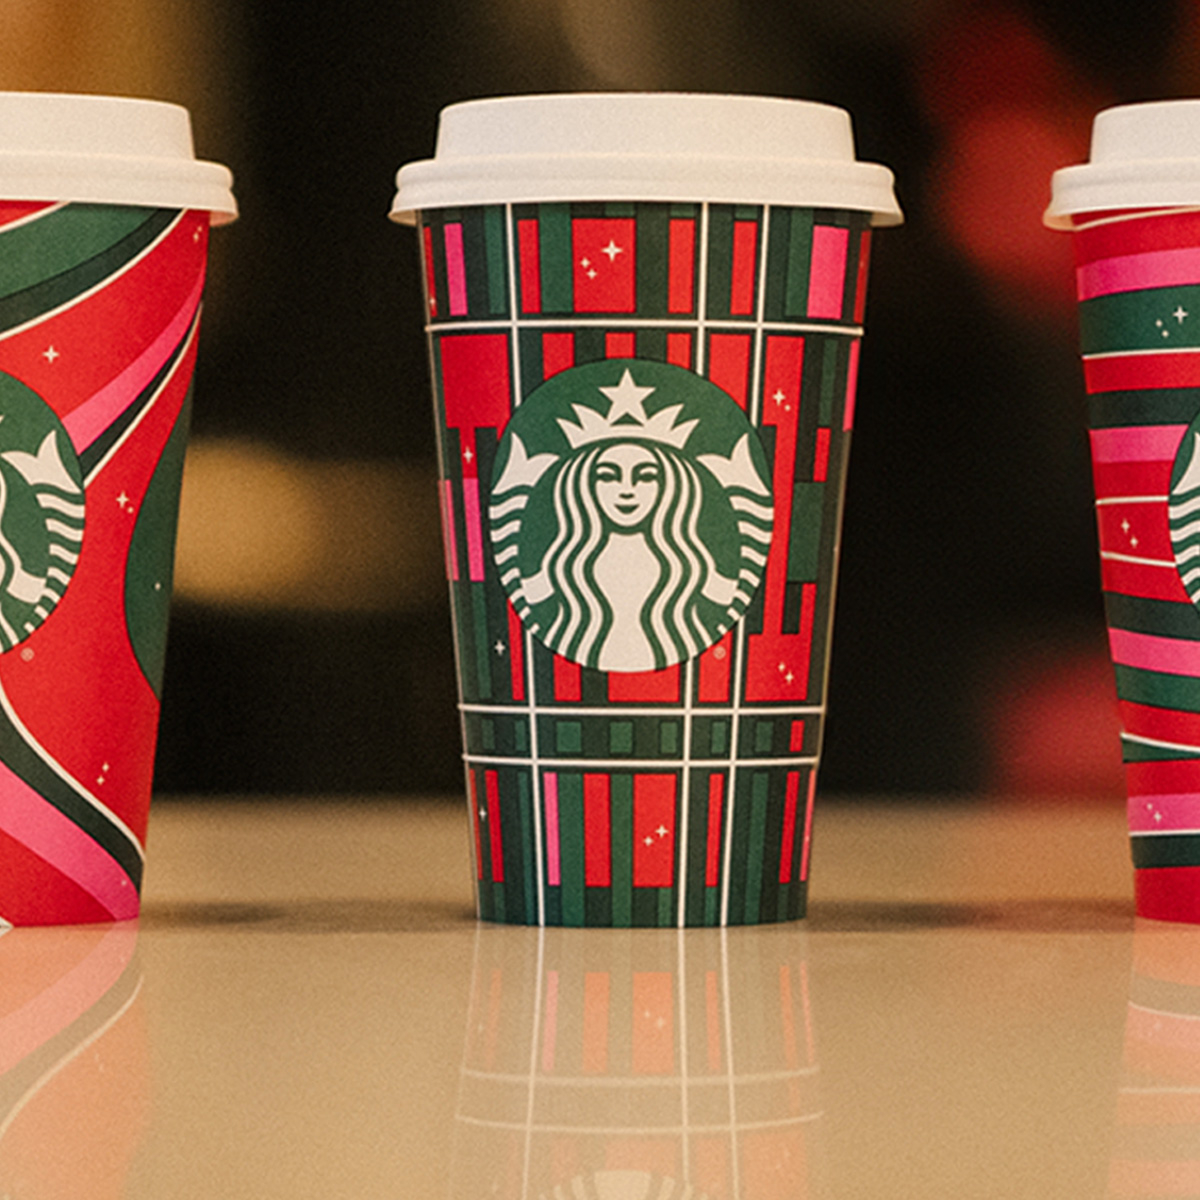 Starbucks opts for 'coffee' not 'Christmas' on its new holiday